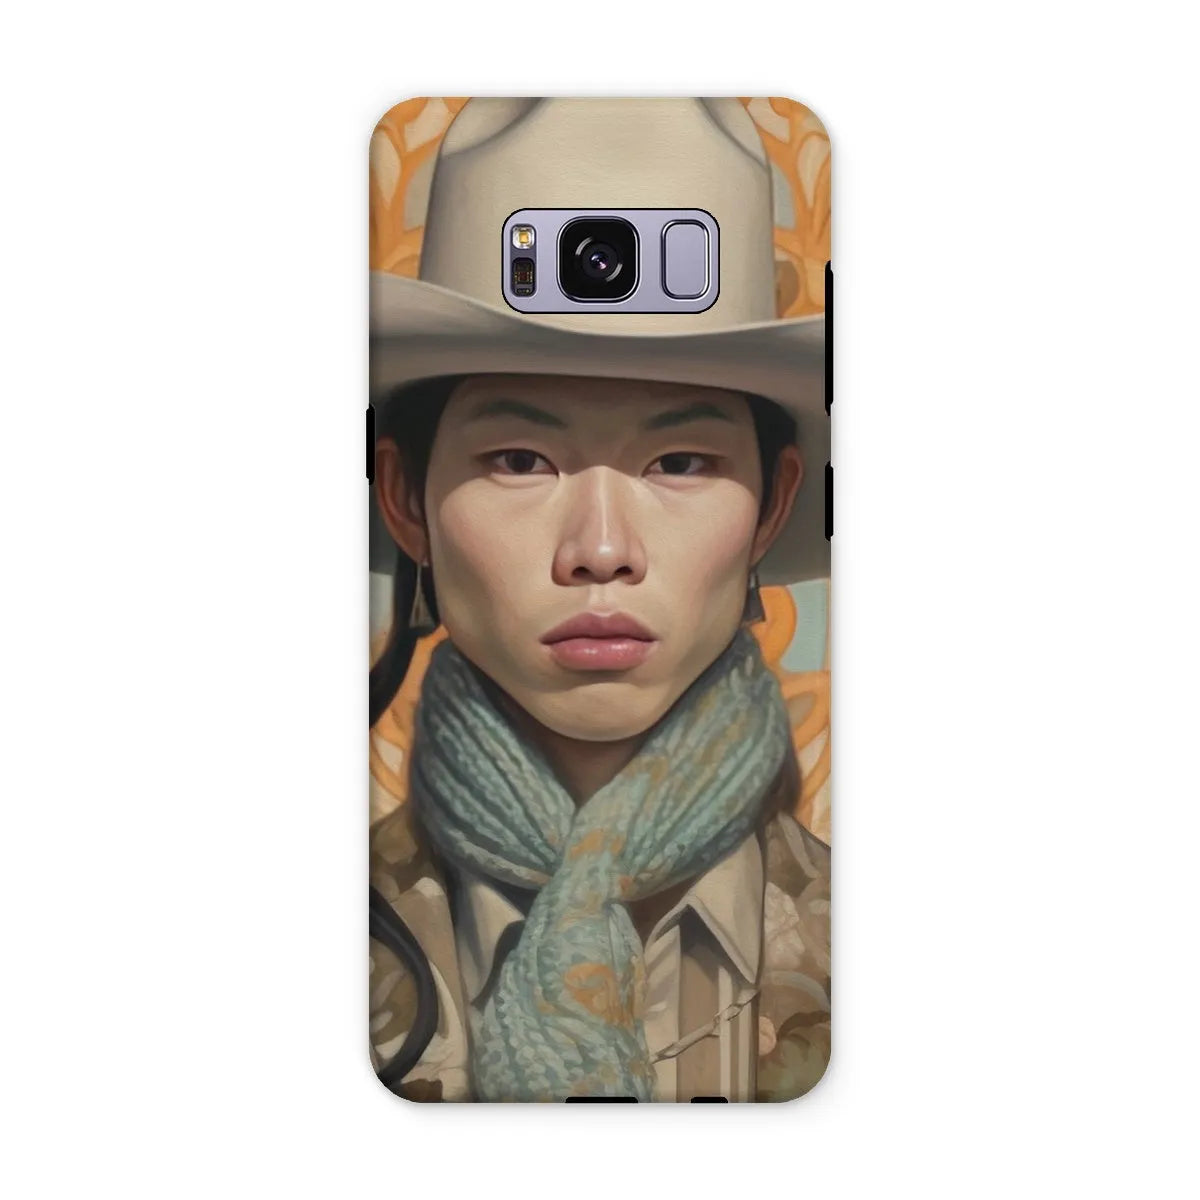 Baihu The Gay Cowboy - Gay Aesthetic Art Phone Case - Samsung Galaxy S8 Plus / Matte - Mobile Phone Cases - Aesthetic